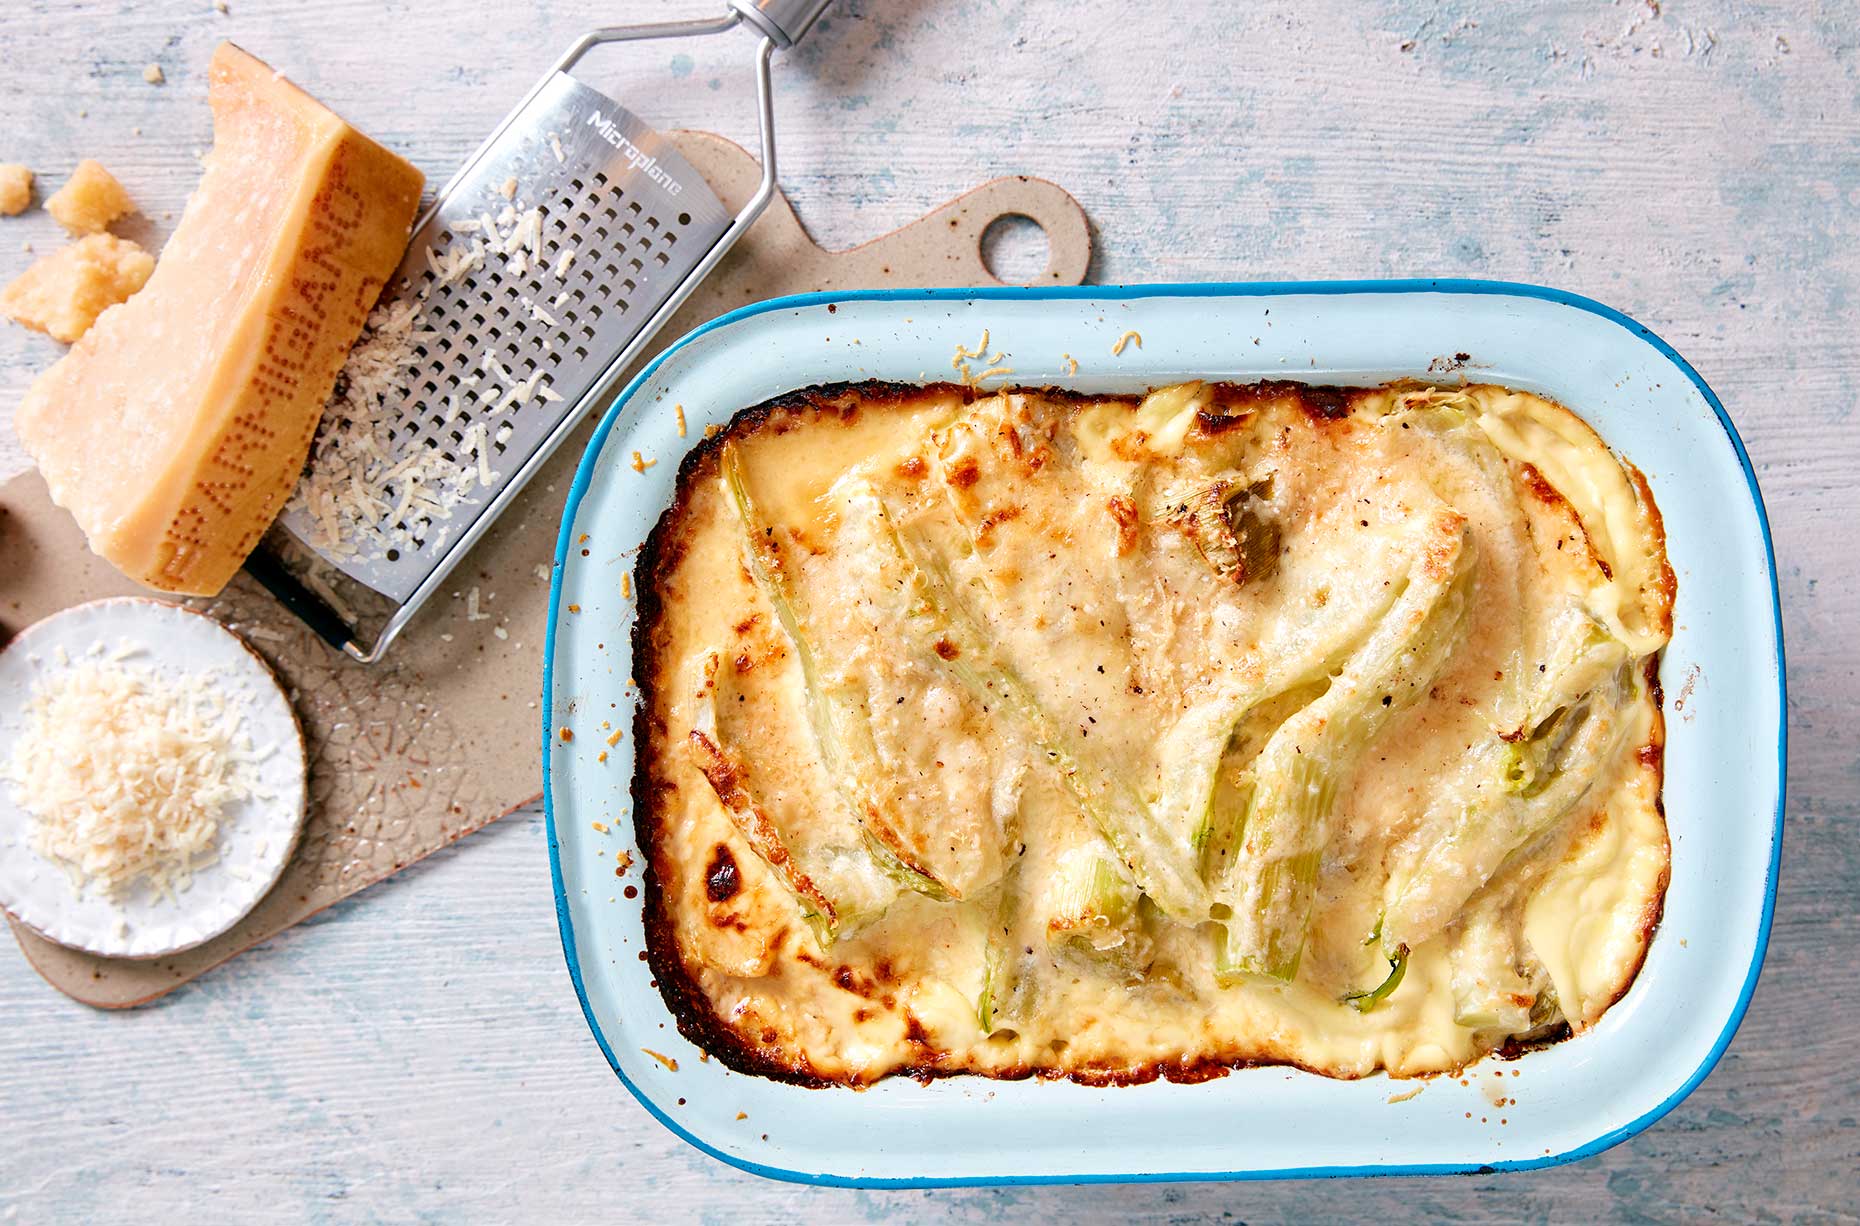 Leek, fennel and Parmesan bake (Image: Photographed and styled at Steve Lee Studios, courtesy of Parmigiano Reggiano)